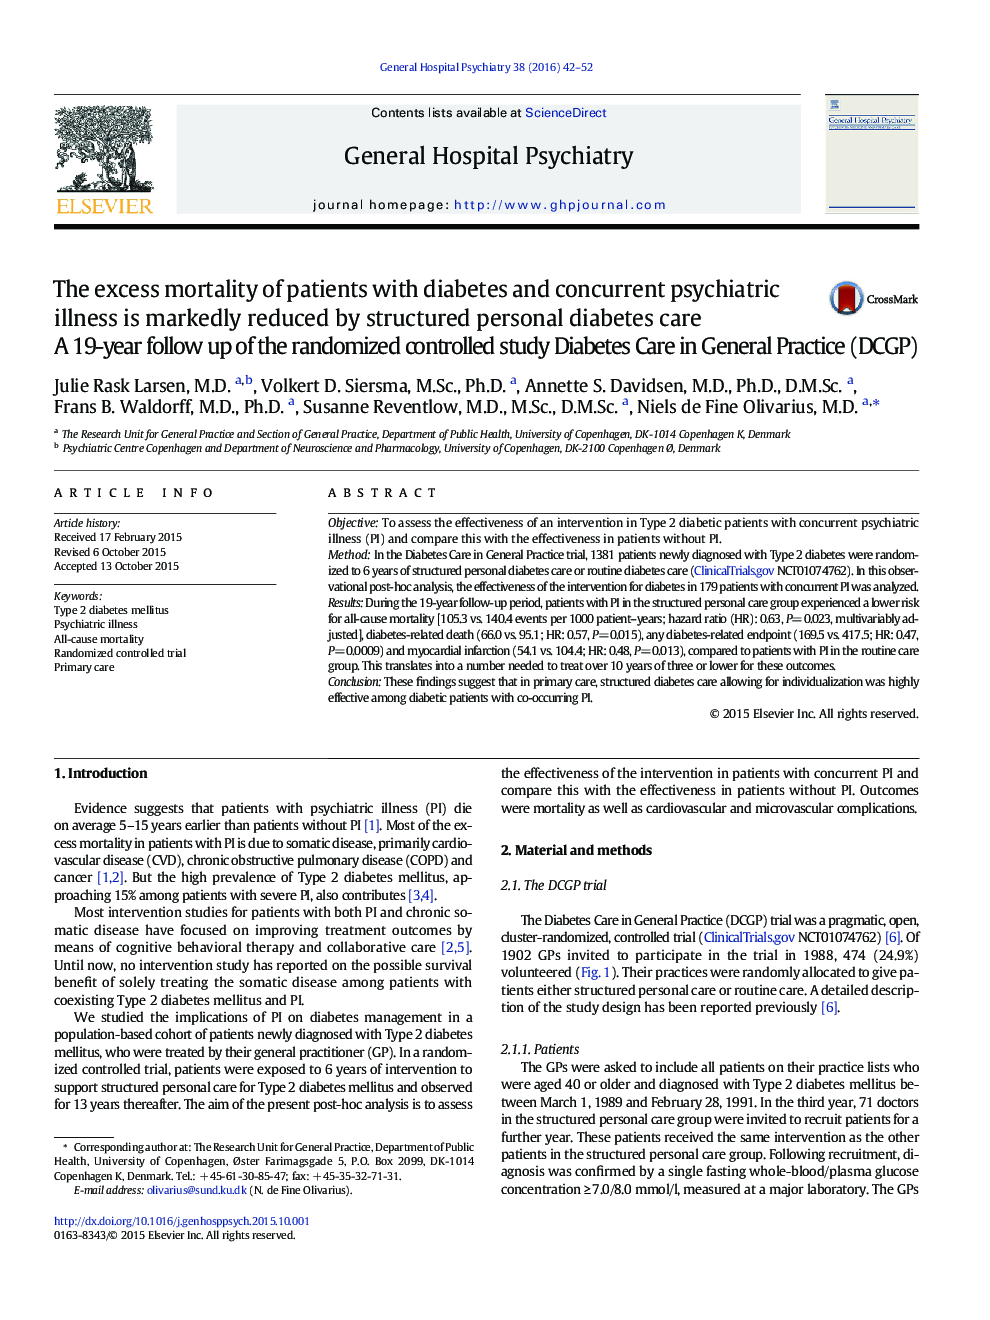 The excess mortality of patients with diabetes and concurrent psychiatric illness is markedly reduced by structured personal diabetes care: A 19-year follow up of the randomized controlled study Diabetes Care in General Practice (DCGP)